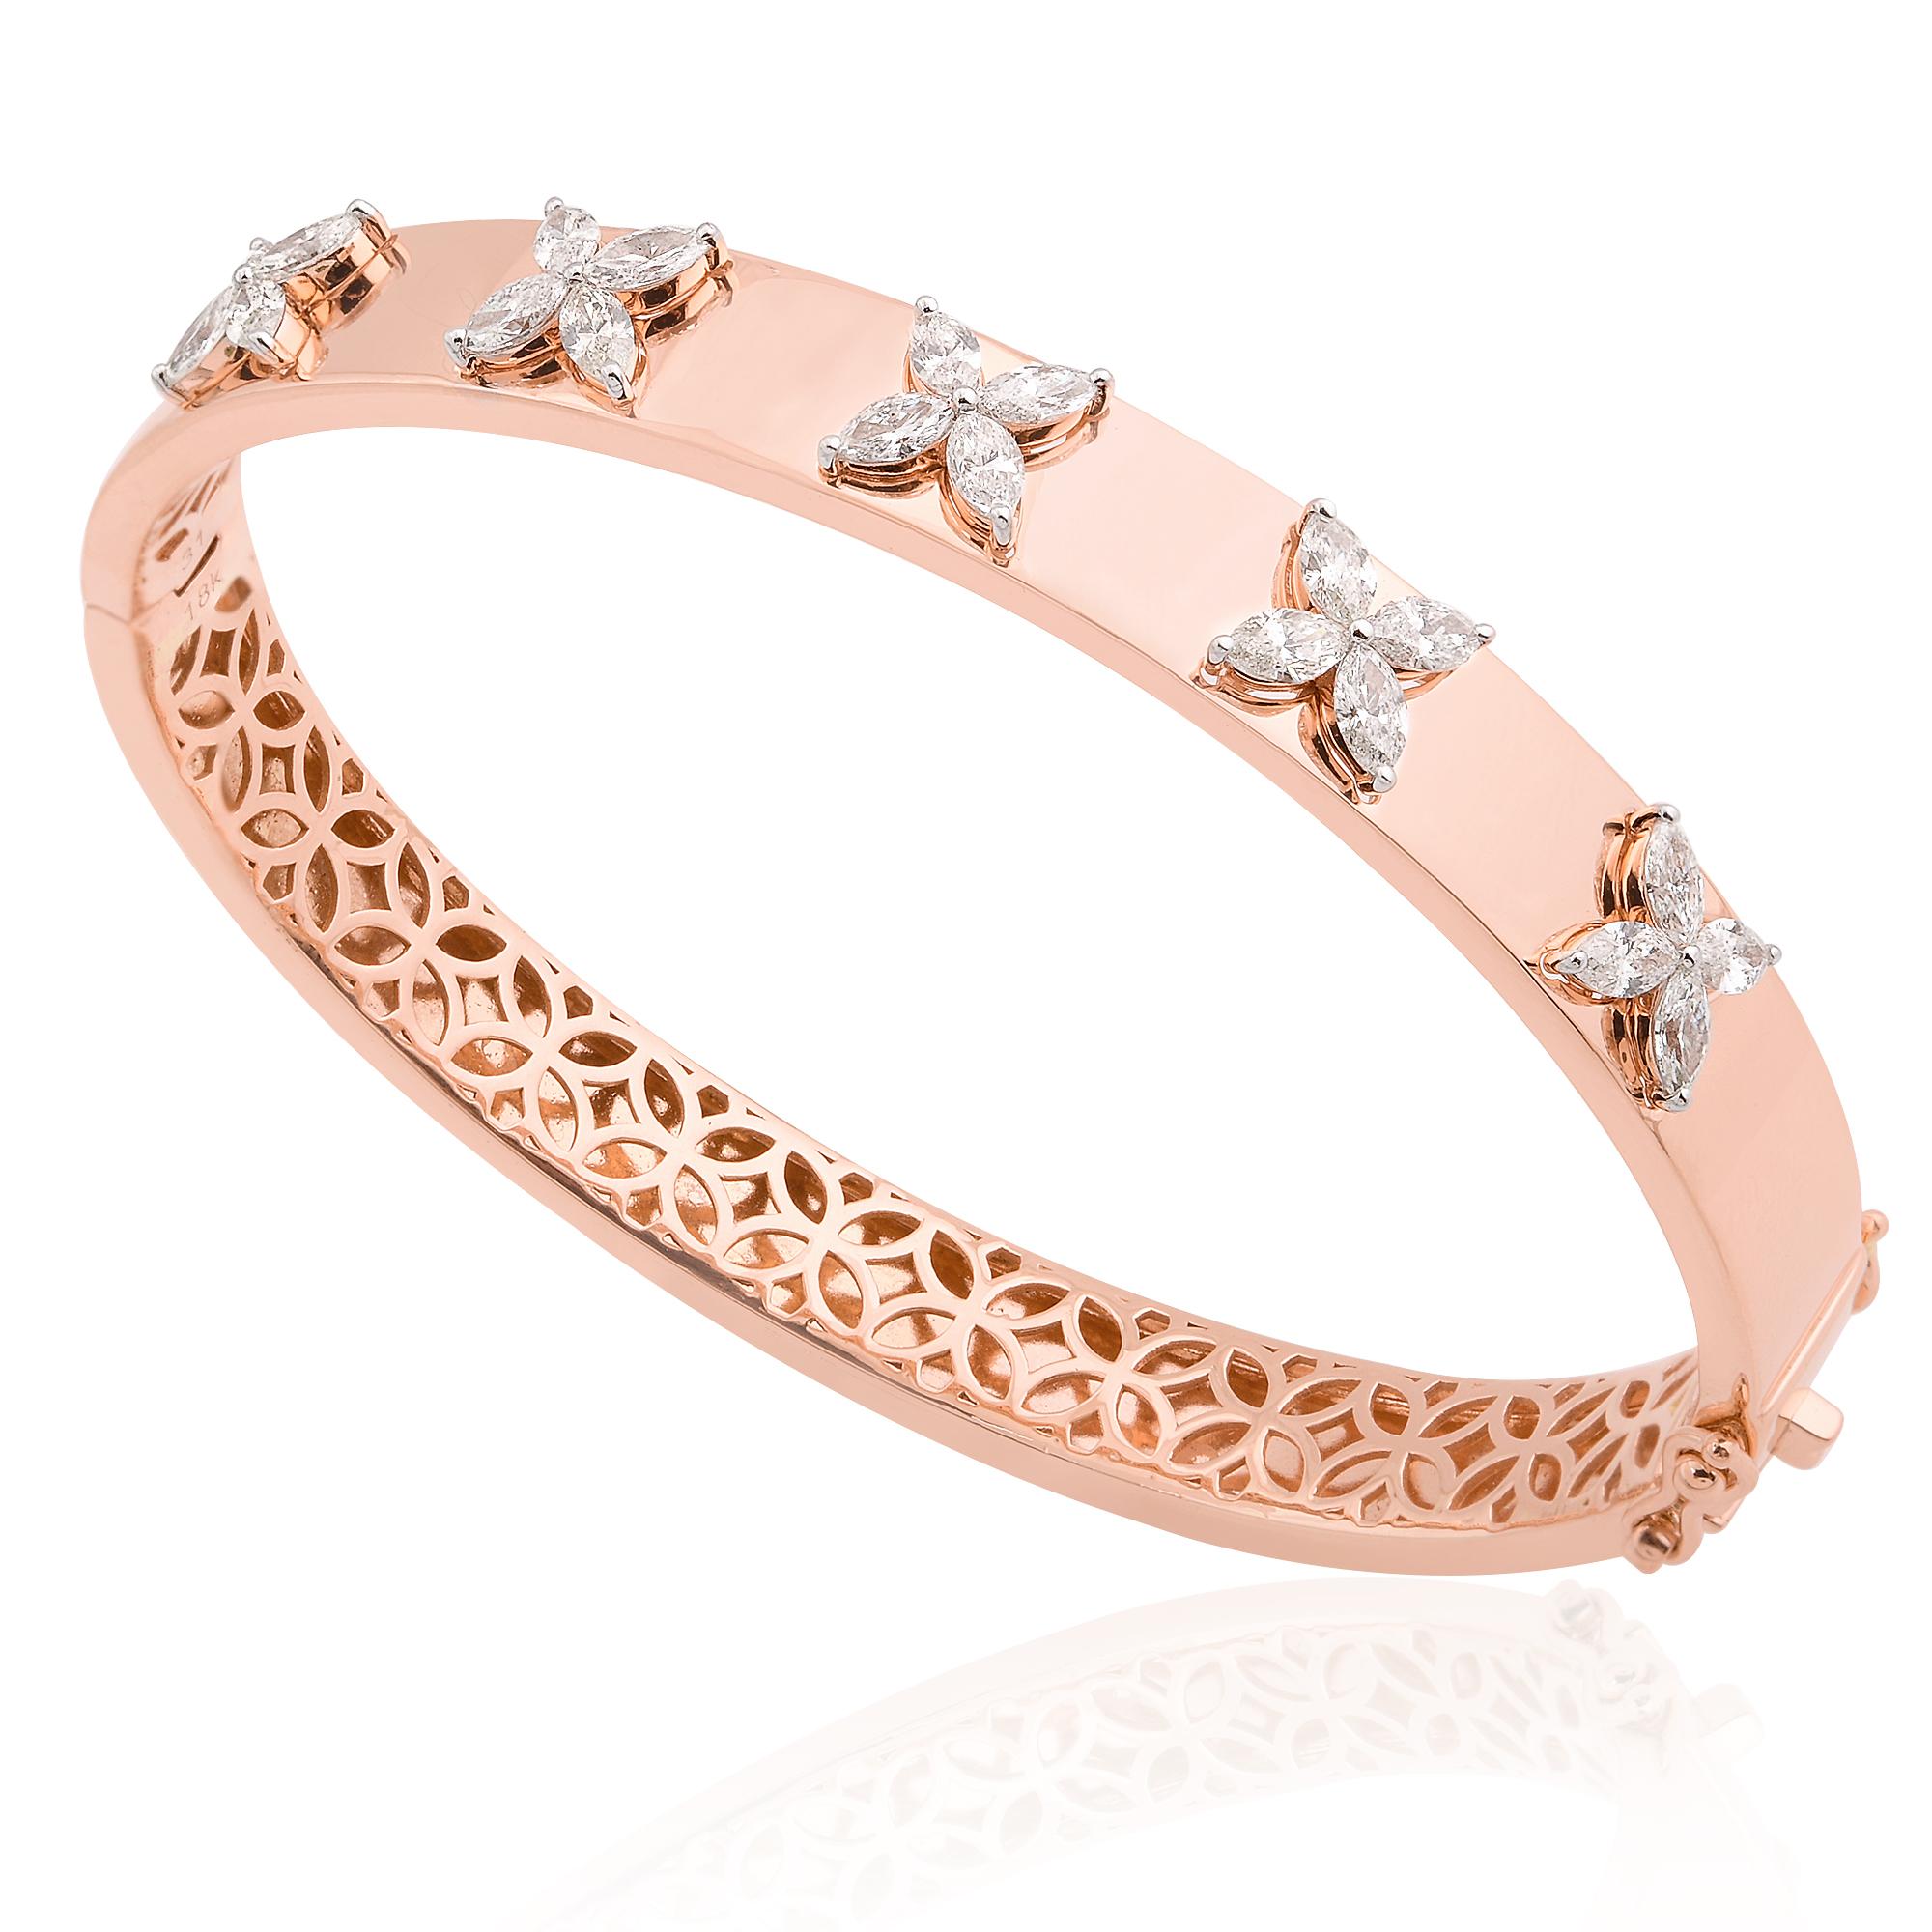 Item Code :- SEB-6243
Gross Wet. :- 20.33 gm
18k Solid Rose Gold Wet. :- 20.03 gm
Natural Diamond Wt. :- 1.51 Carat ( AVERAGE DIAMOND CLARITY SI1-SI2 & COLOR H-I )
Bracelet Size :- 32 x 60 mm approx.

✦ Sizing
.....................
We can adjust